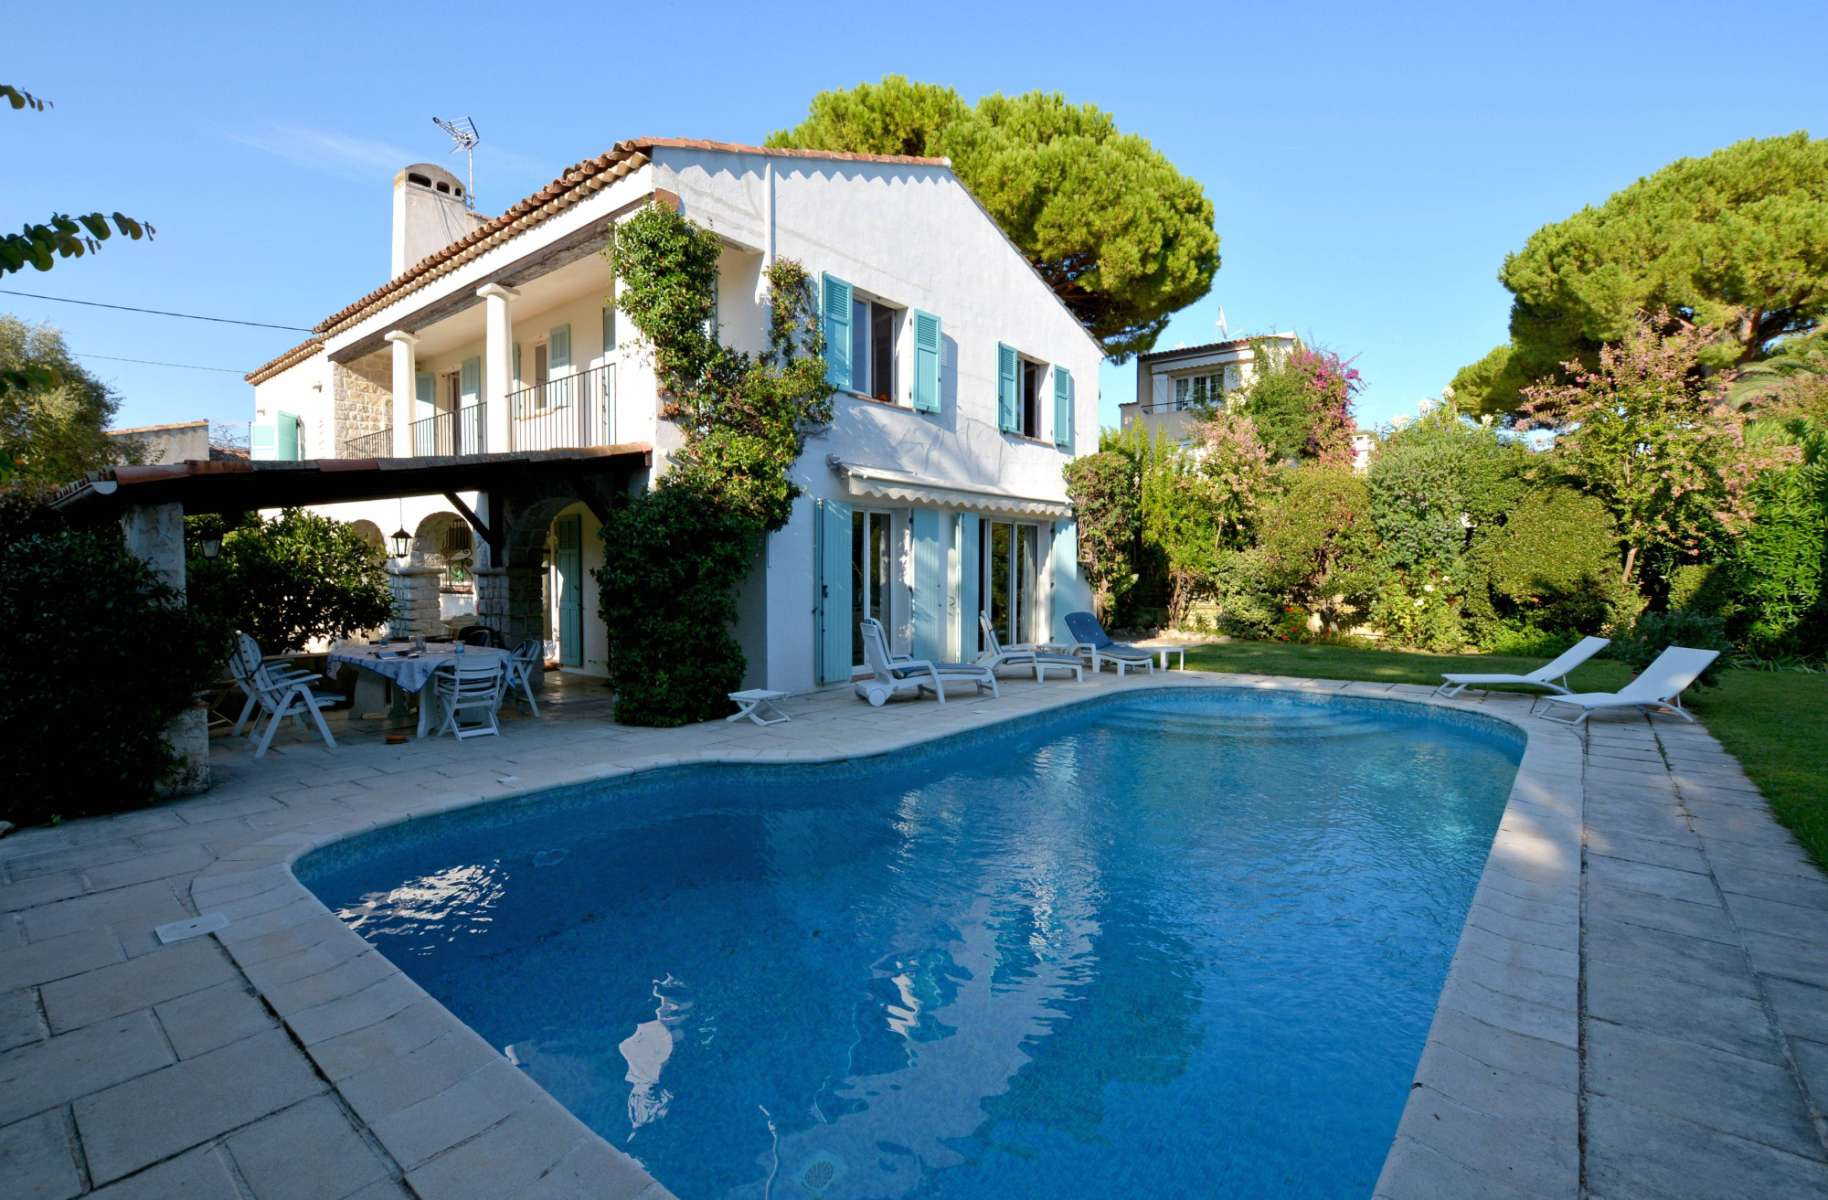 Villa for rent in Cap d'Antibes near the sea